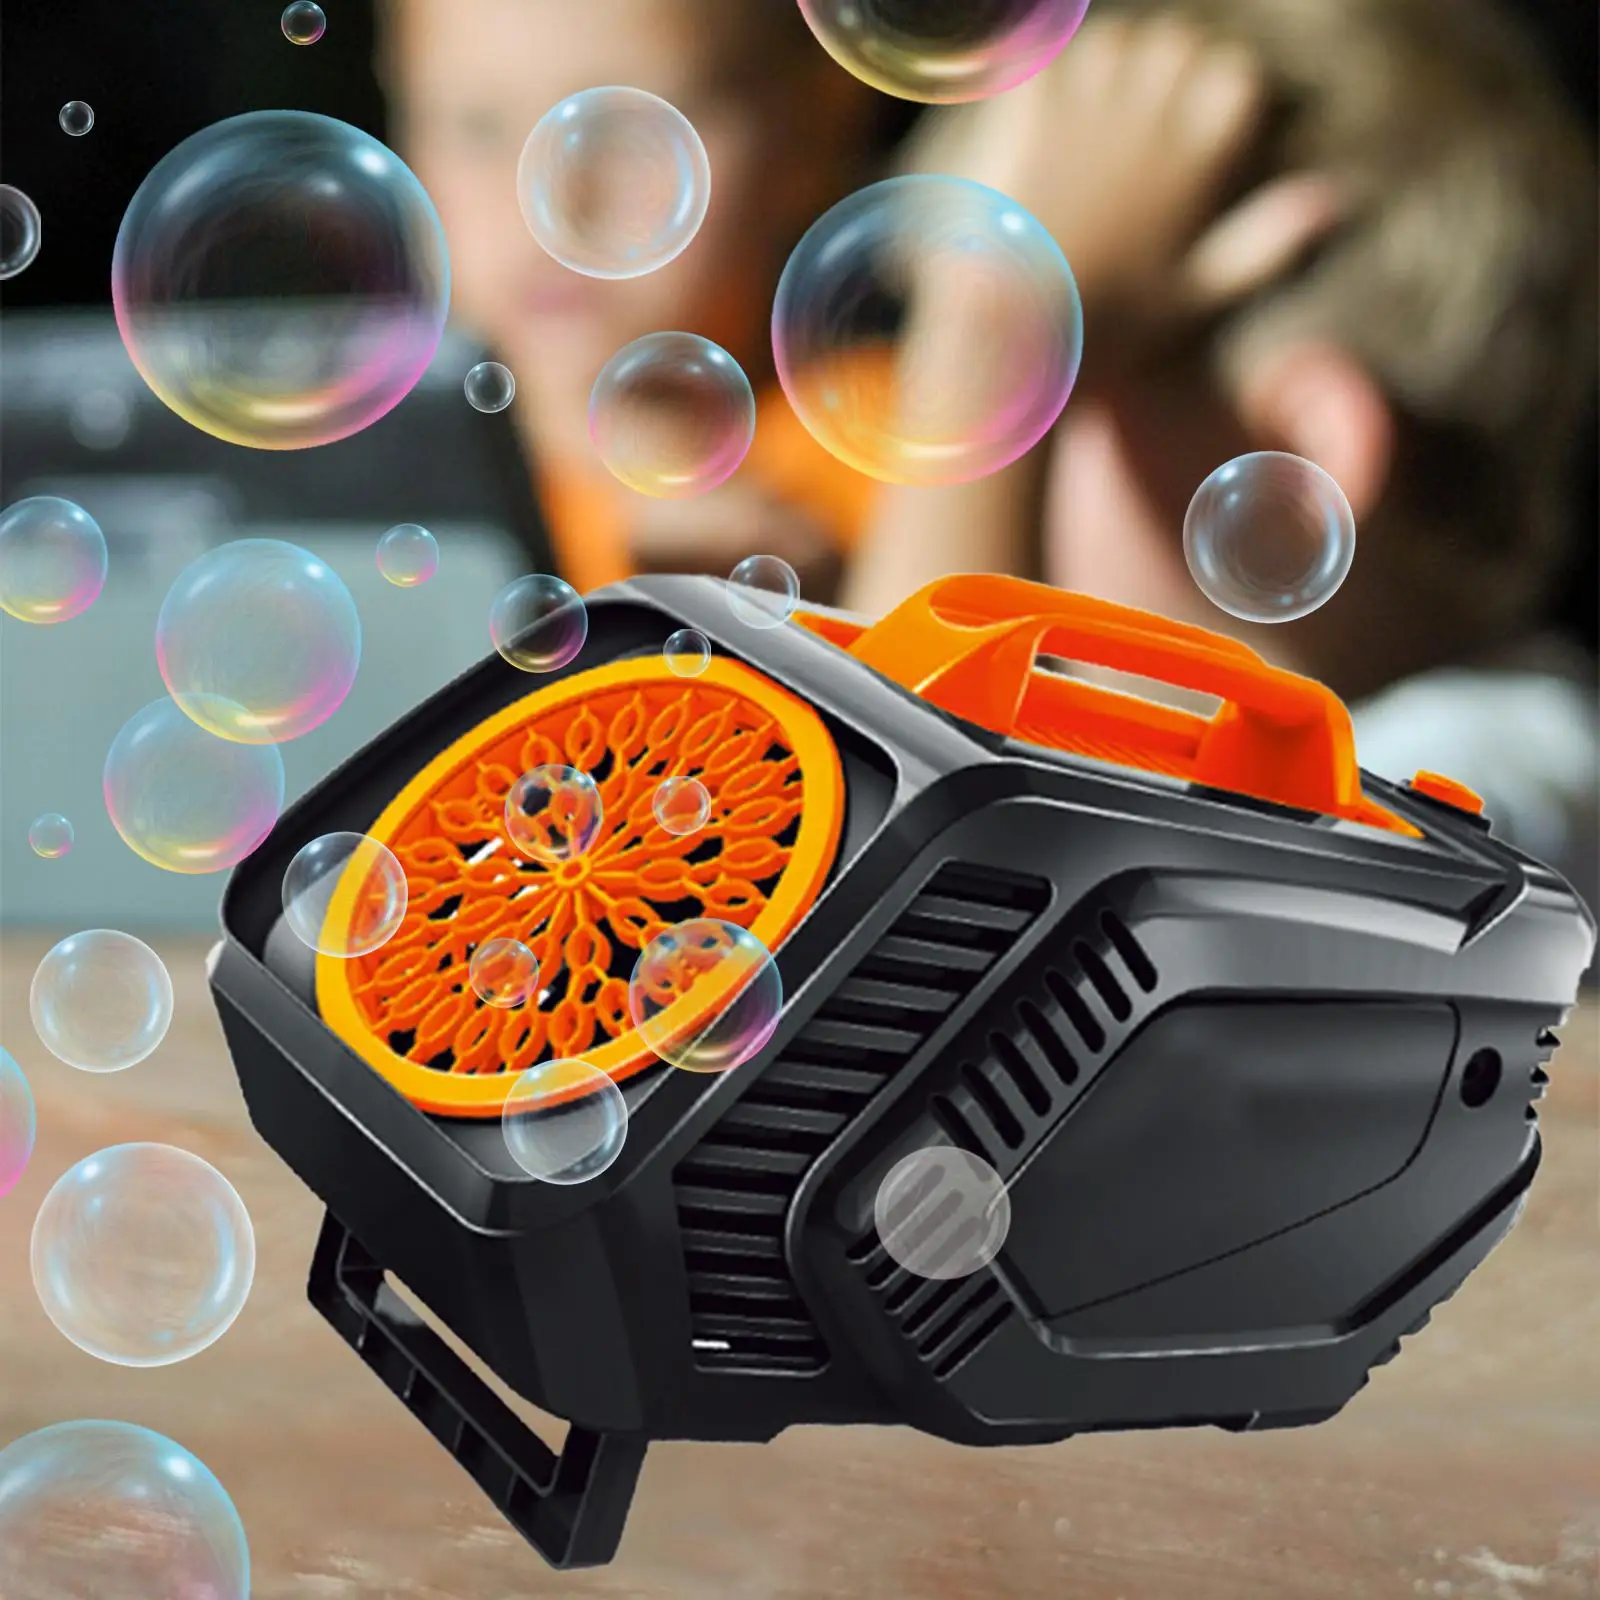 Automatic Bubble Maker Machine with 12000 Bubbles Per Minute Portable Bubble Blower for Outdoor Summer Birthday Parties Kids